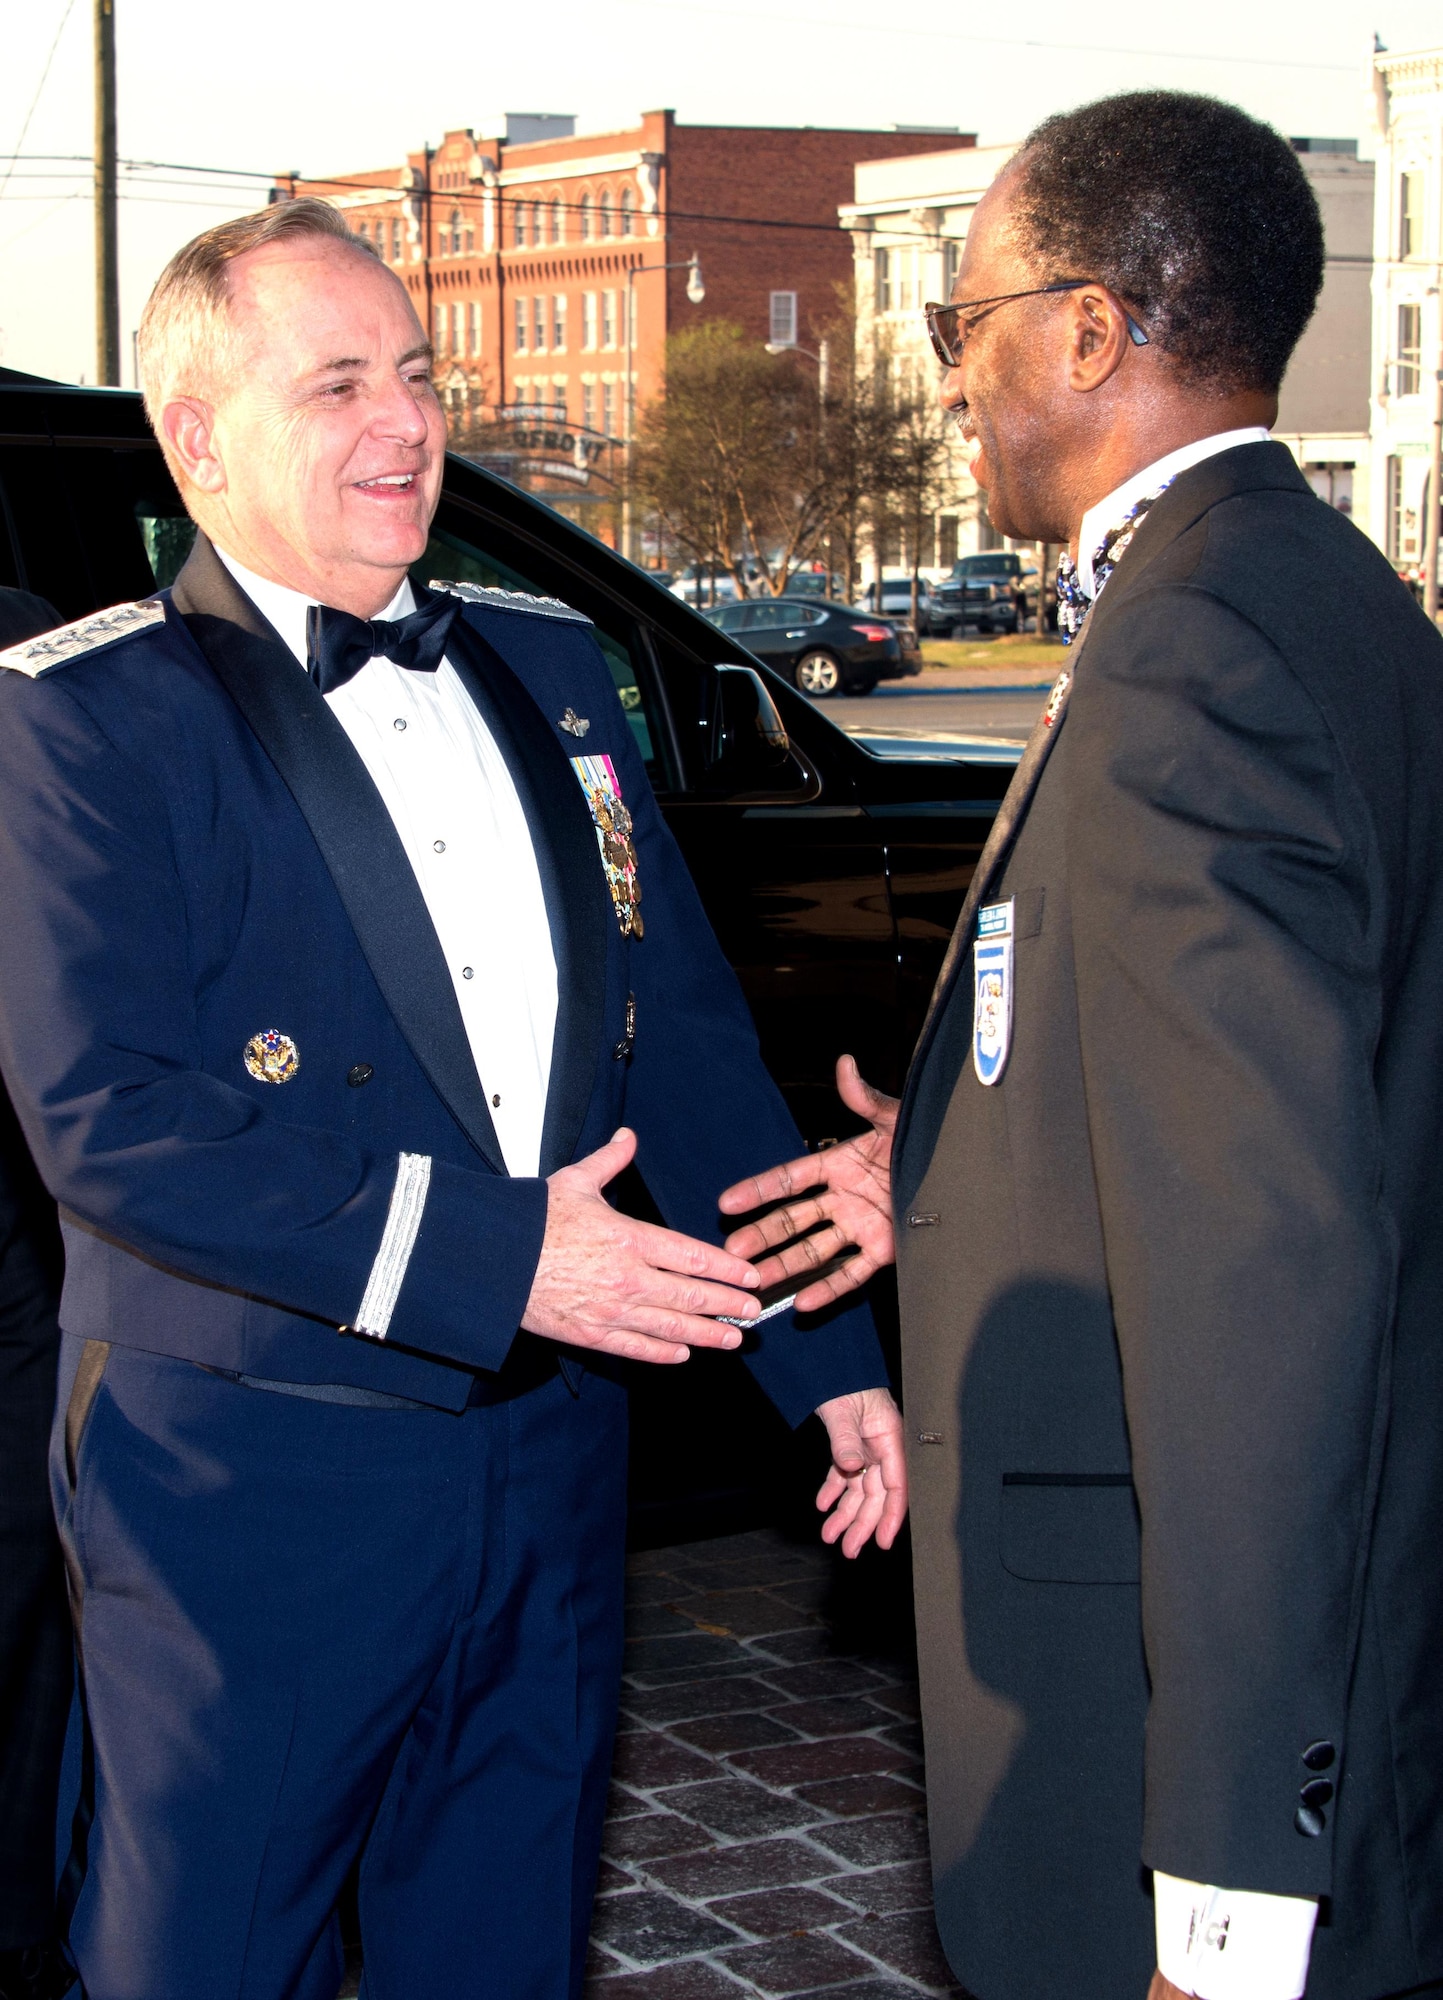 Retired Brig. Gen. Leon Johnson, right, greets Air Force Chief of Staff Mark A. Welsh III in downtown Montgomery, Ala., March 22, 2016, at the start of the Tuskegee Airmen Foundation’s 75th anniversary commemoration. Johnson is the foundation’s board chair and the national president of Tuskegee Airmen Inc. Welsh was inducted as an honorary member during the event. (U.S. Air Force photo/Trey Ward)